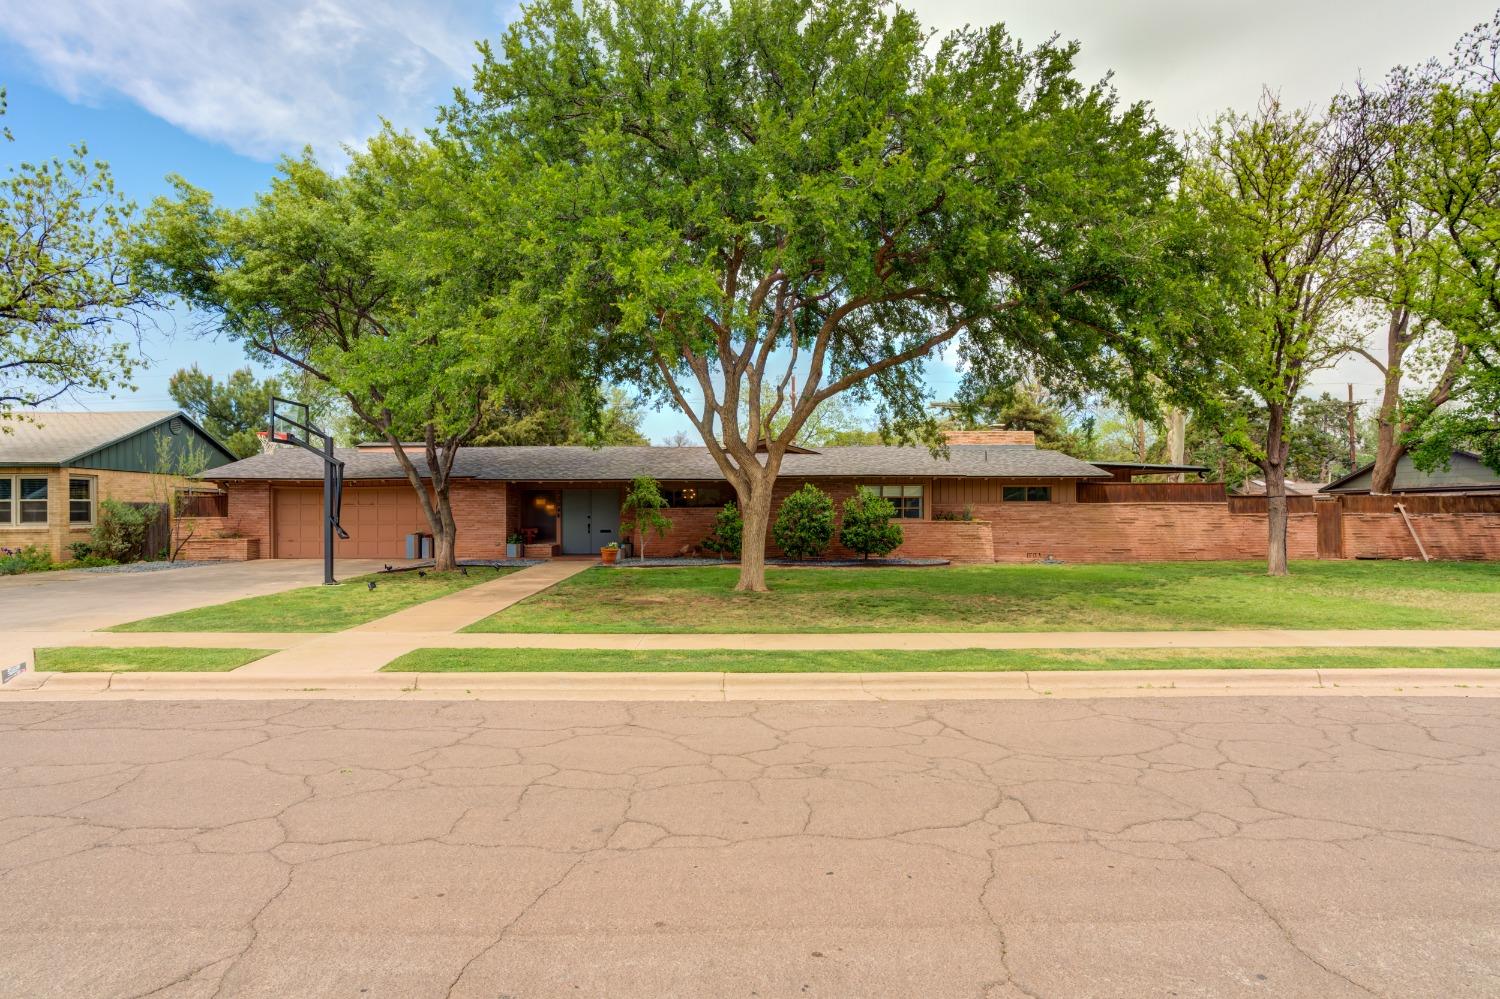 Situated in the highly sought-after Tech Terrace Area and within the coveted Roscoe-Wilson Elementary District, it offers both a prime location and excellent schooling options. With its spacious layout spread across two lots, it's not just a home; it's a masterpiece of mid-century architecture. The combination of ample space, architectural integrity, and desirable location makes it a rare find.With its large, open spaces, two gorgeous fireplaces, and custom-built bar, it's perfectly designed for hosting gatherings and creating memorable moments with friends and family. The original St. Charles kitchen with a custom island adds a touch of vintage charm and practicality, offering both style and functionality. Conveniently located close to two parks, pizza joint, and coffee shop makes this home the most highly desirable home!